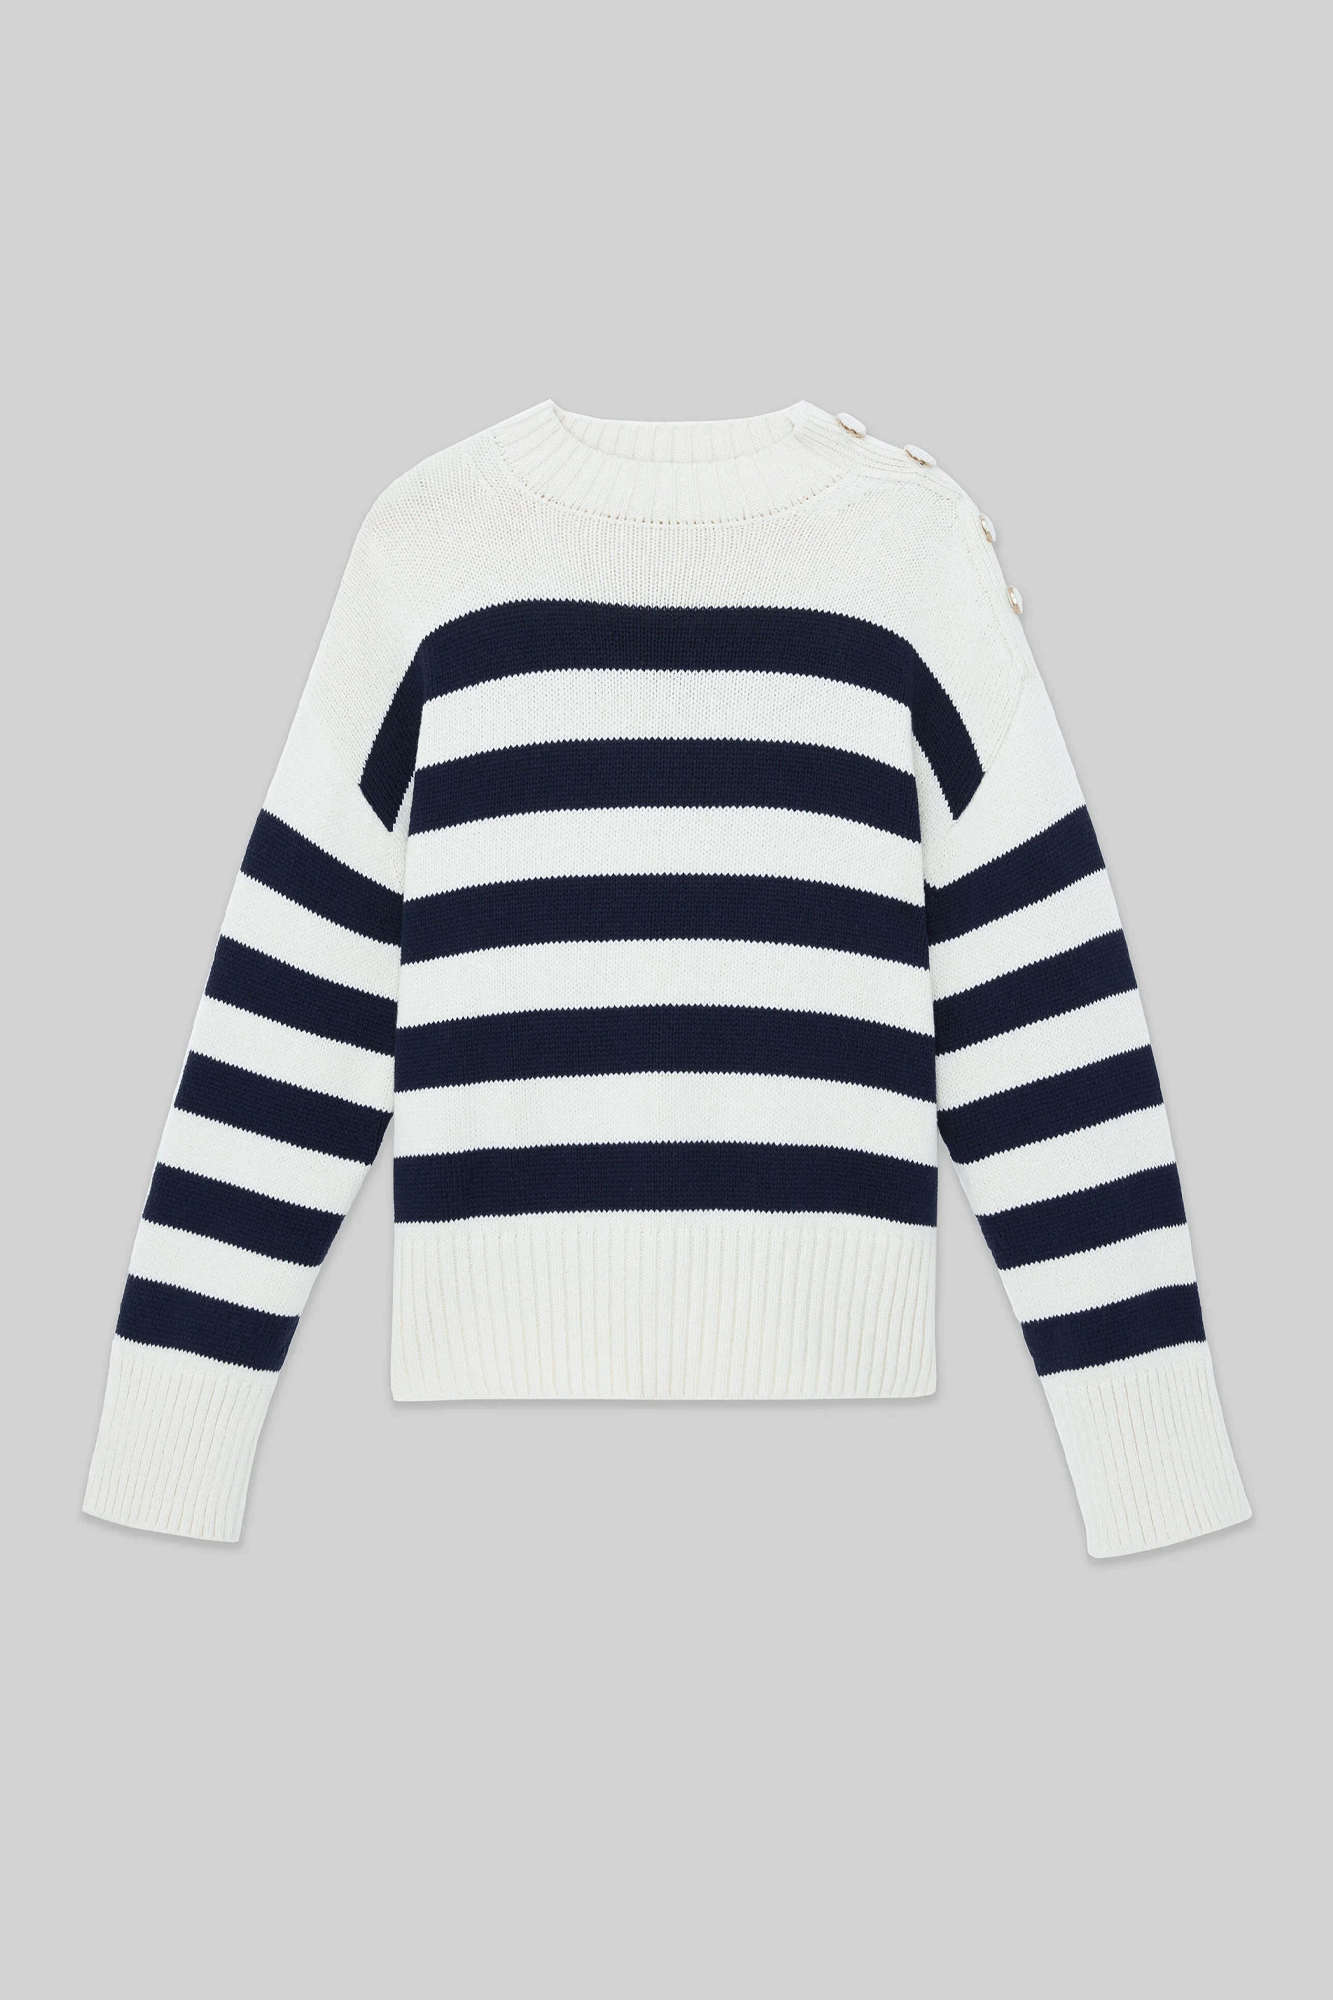 This Nautical Stripe Crewneck from Lafayette 148 is perfect for all seasons. Crafted from a lightweight Italian cotton-wool chainette, it is expertly knit for a classic oversized shape. Featuring bold signature stripes and metal-framed buttons at the shoulder, this nautical-inspired piece is complemented with wide ribbed trims at the cuff and hem.